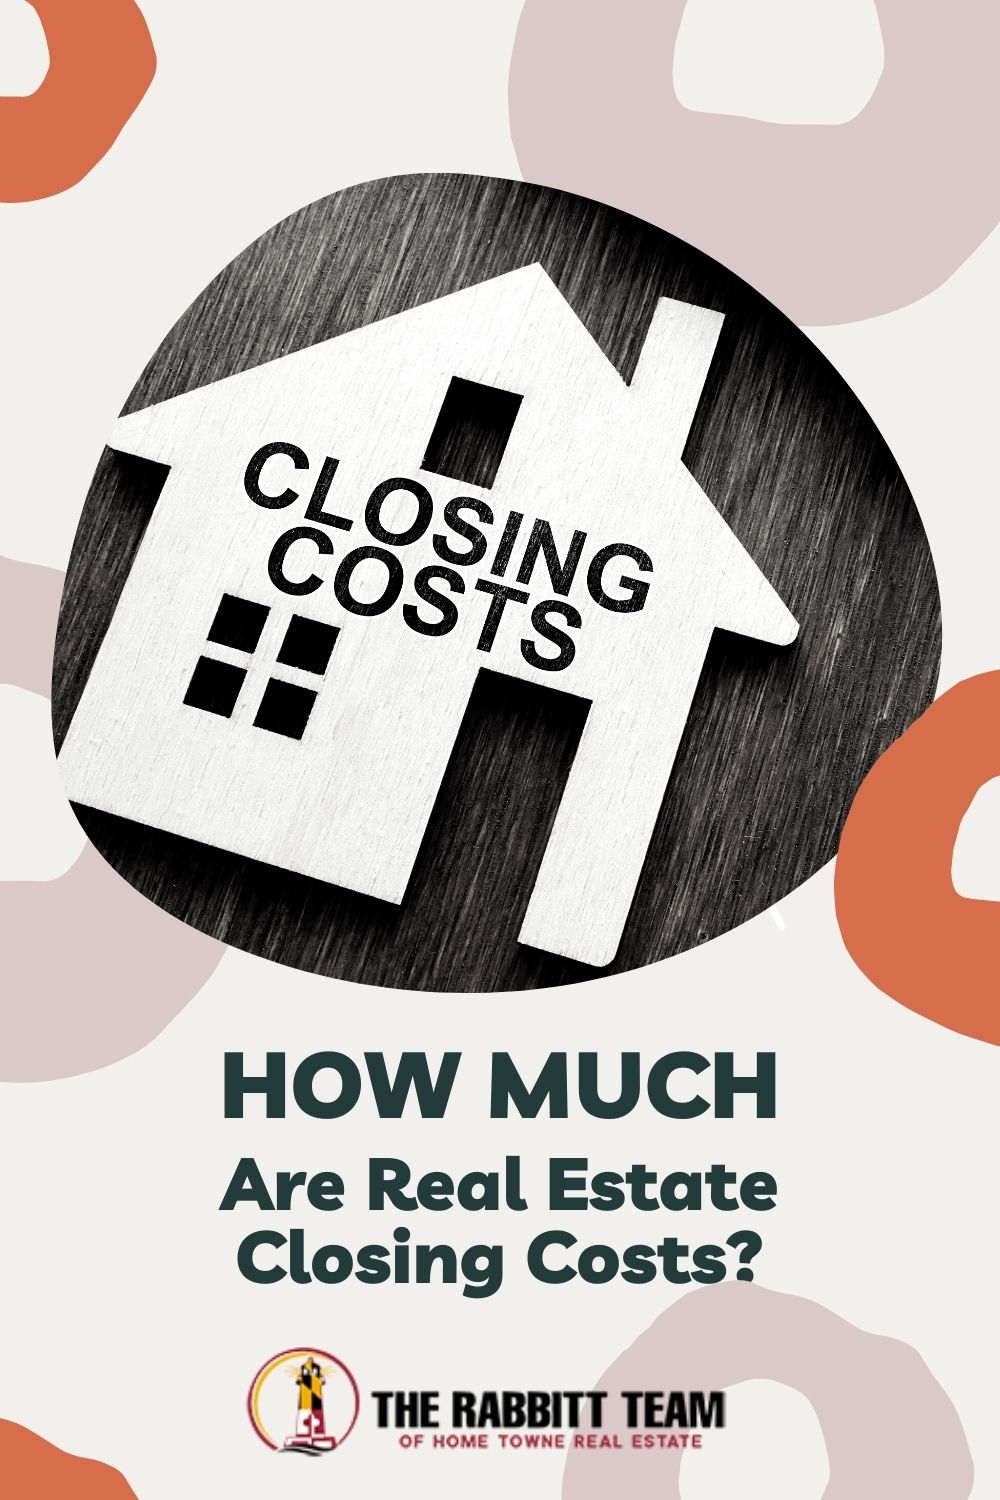 How Much are Real Estate Closing Costs